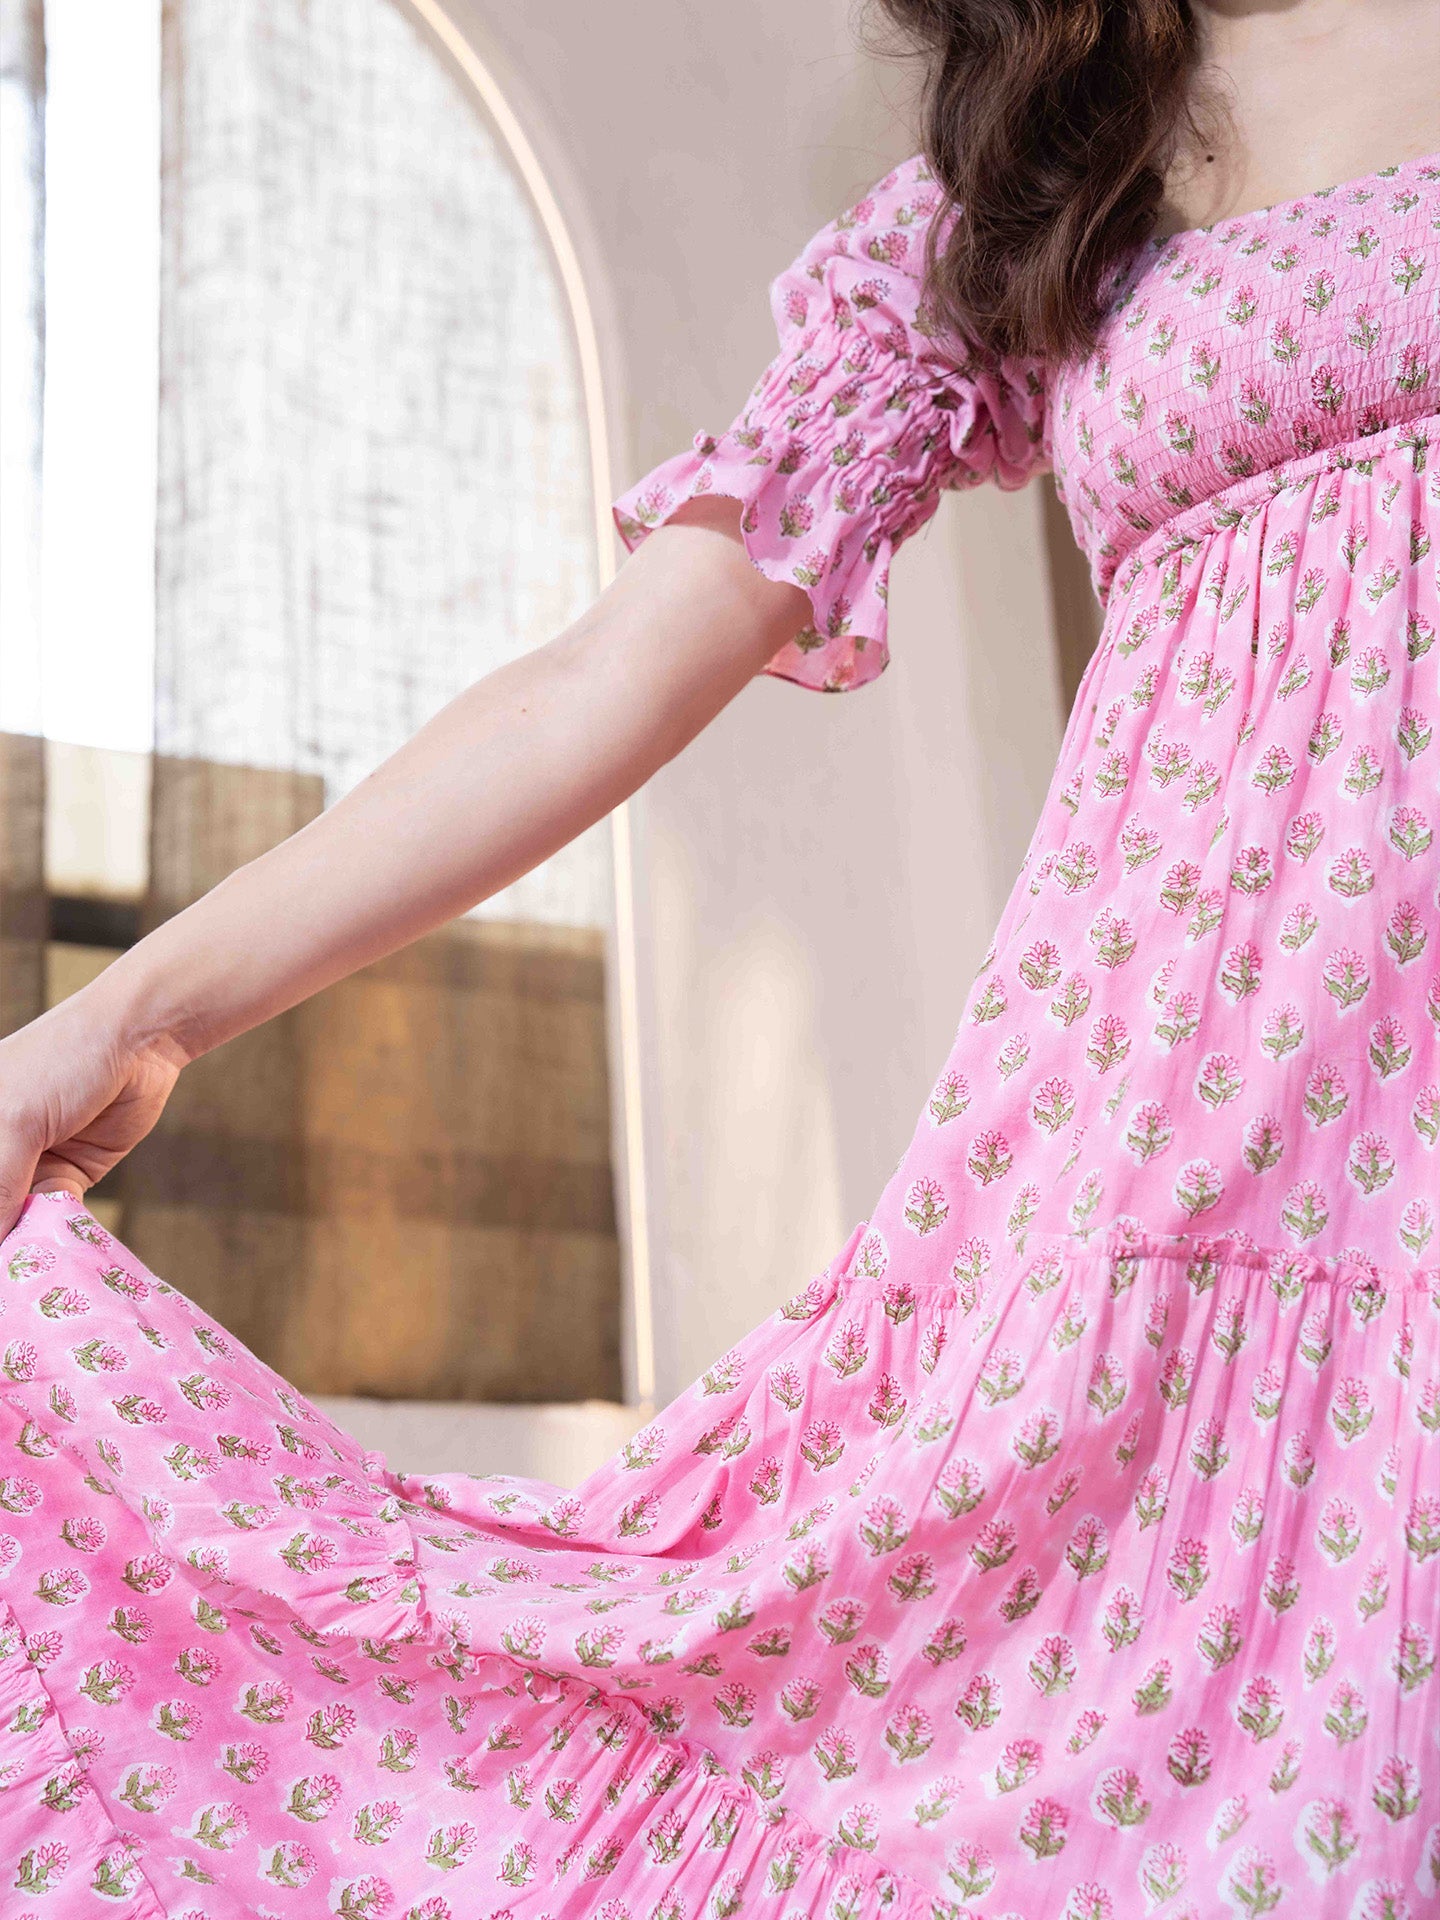 Alice - Floral Printed Maxi Dress - Pink